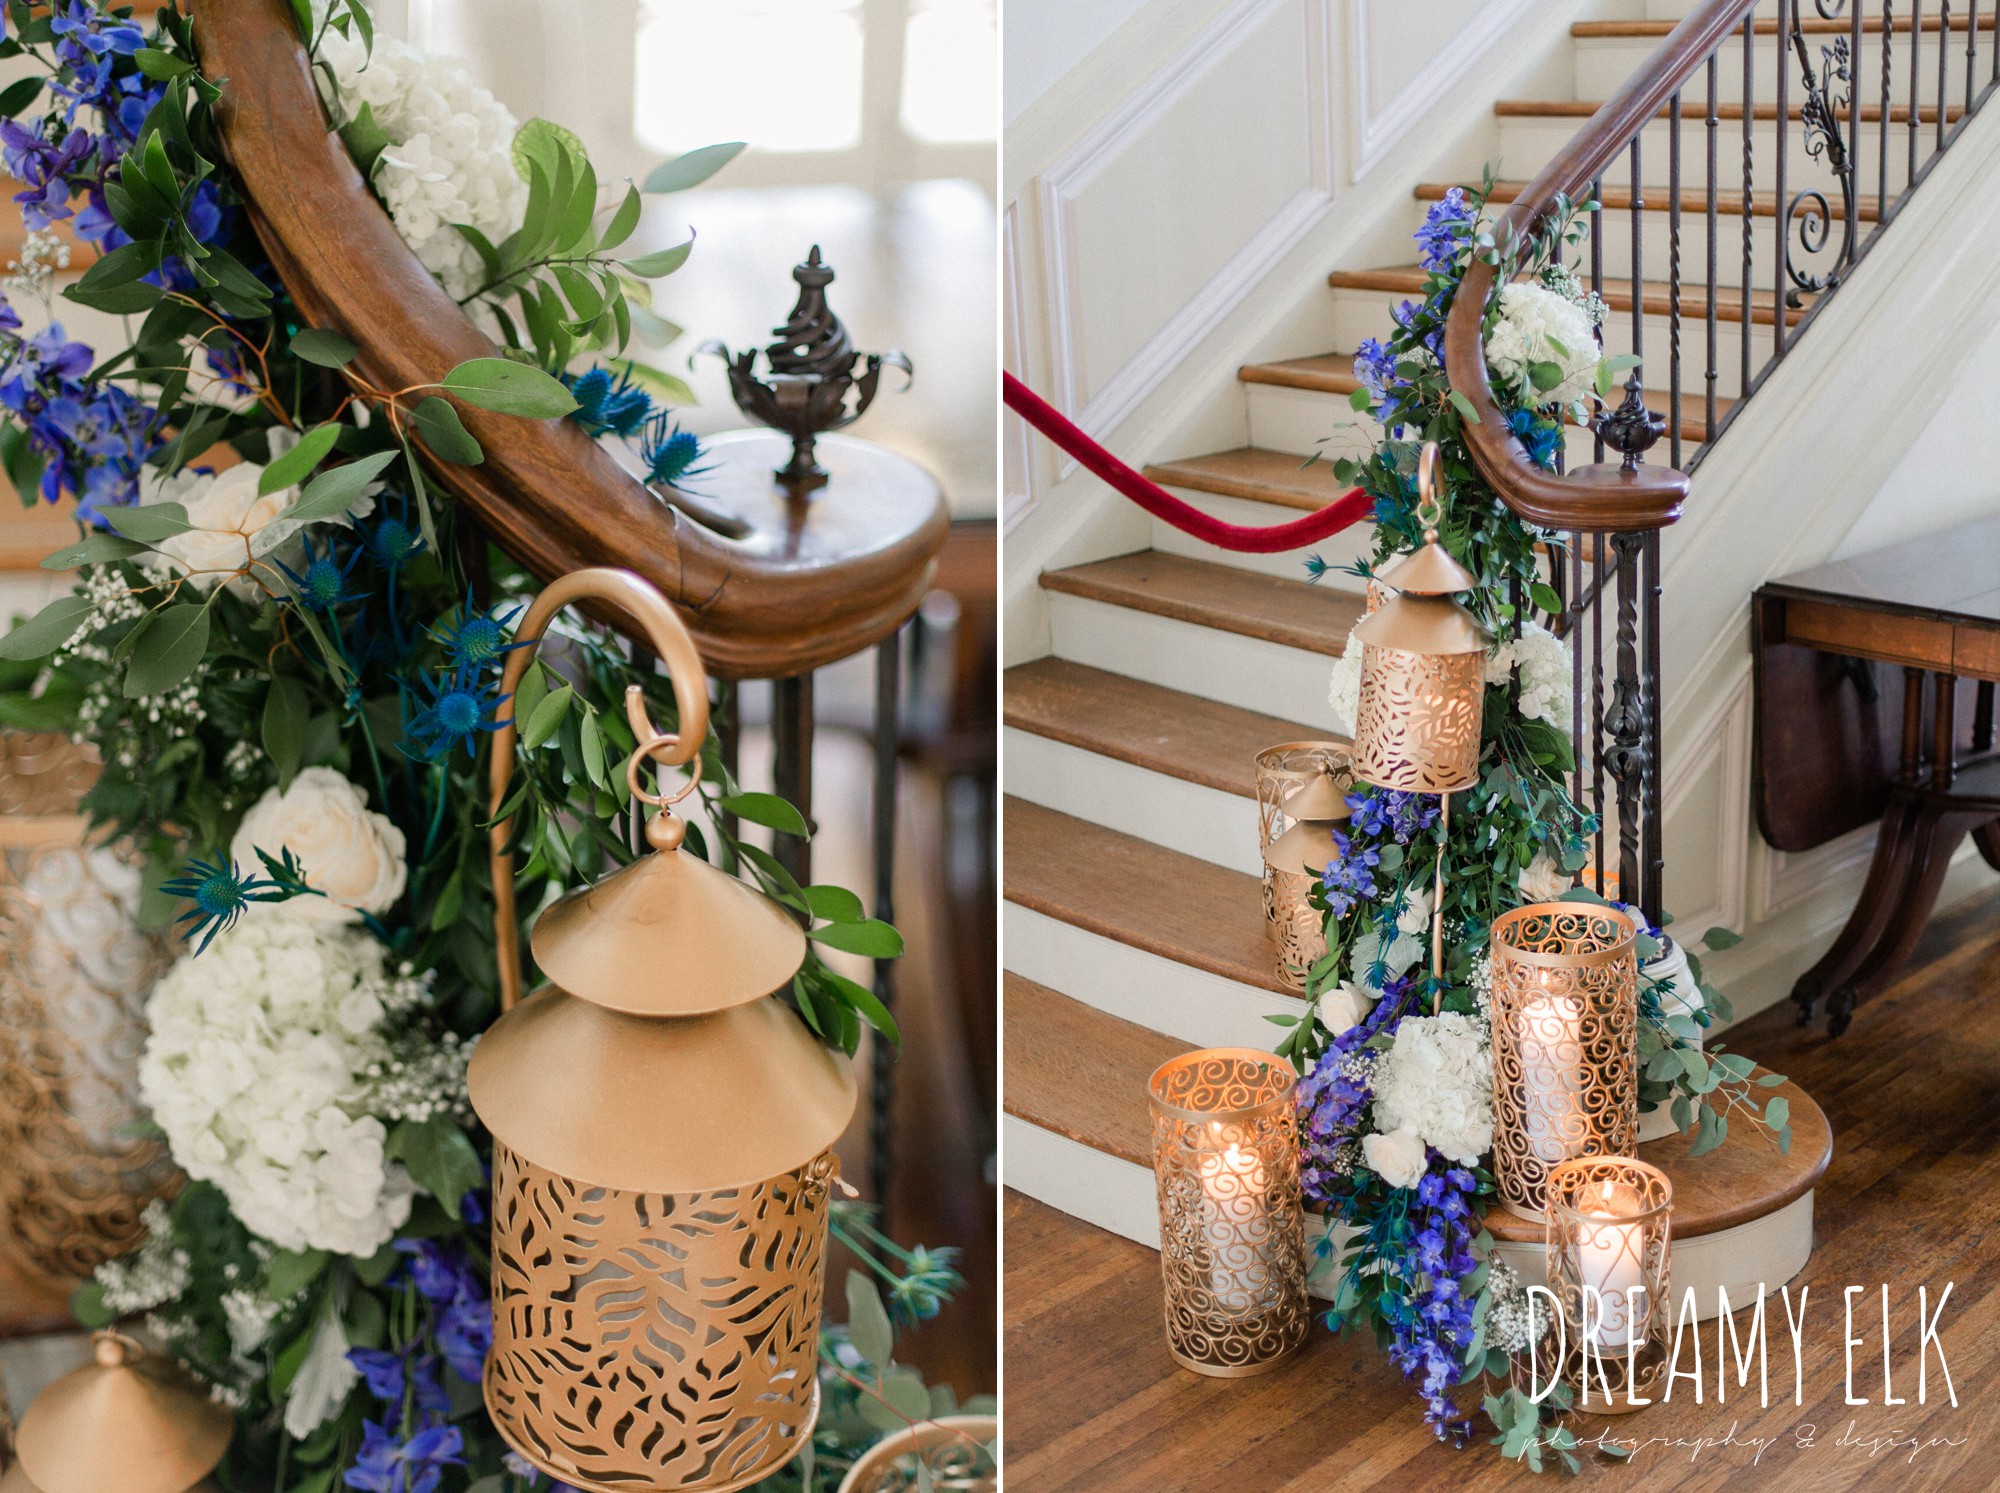 carriage house floral design, blue wedding flowers, spring wedding, the astin mansion, bryan, texas, spring wedding, dreamy elk photography and design